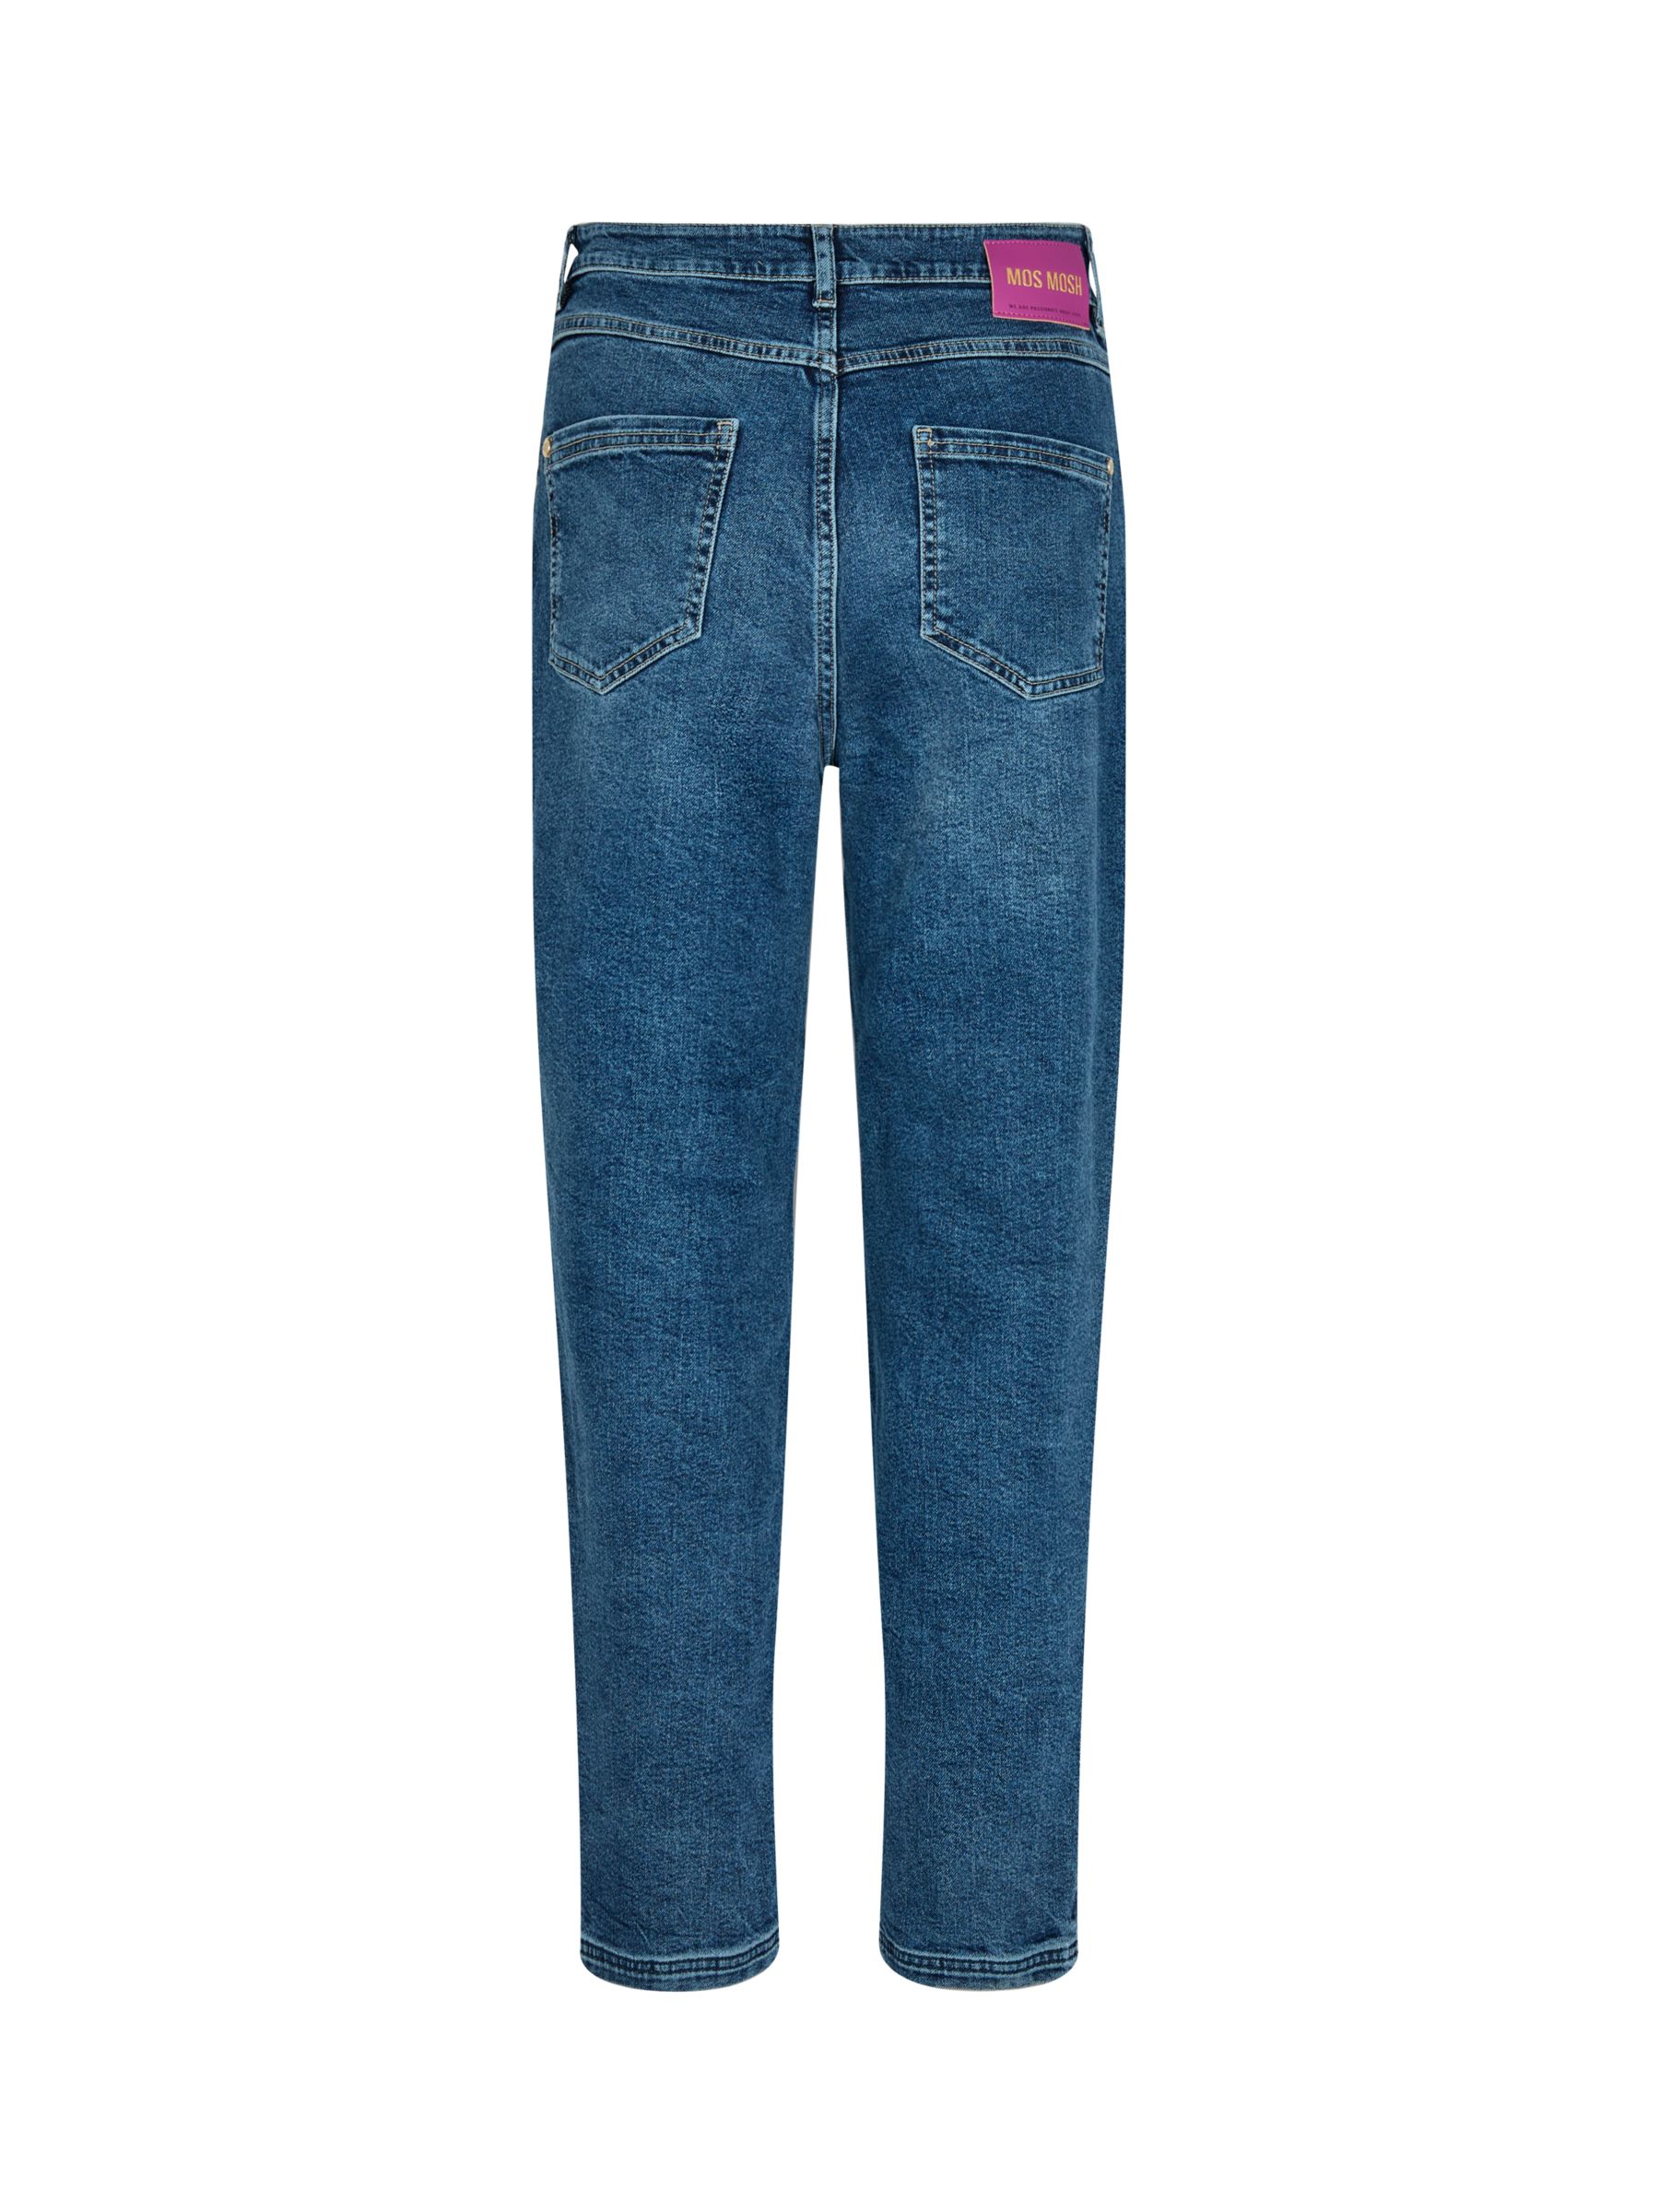 MOS MOSH Adeline Sia Mom Fit Jeans, Blue, 28R